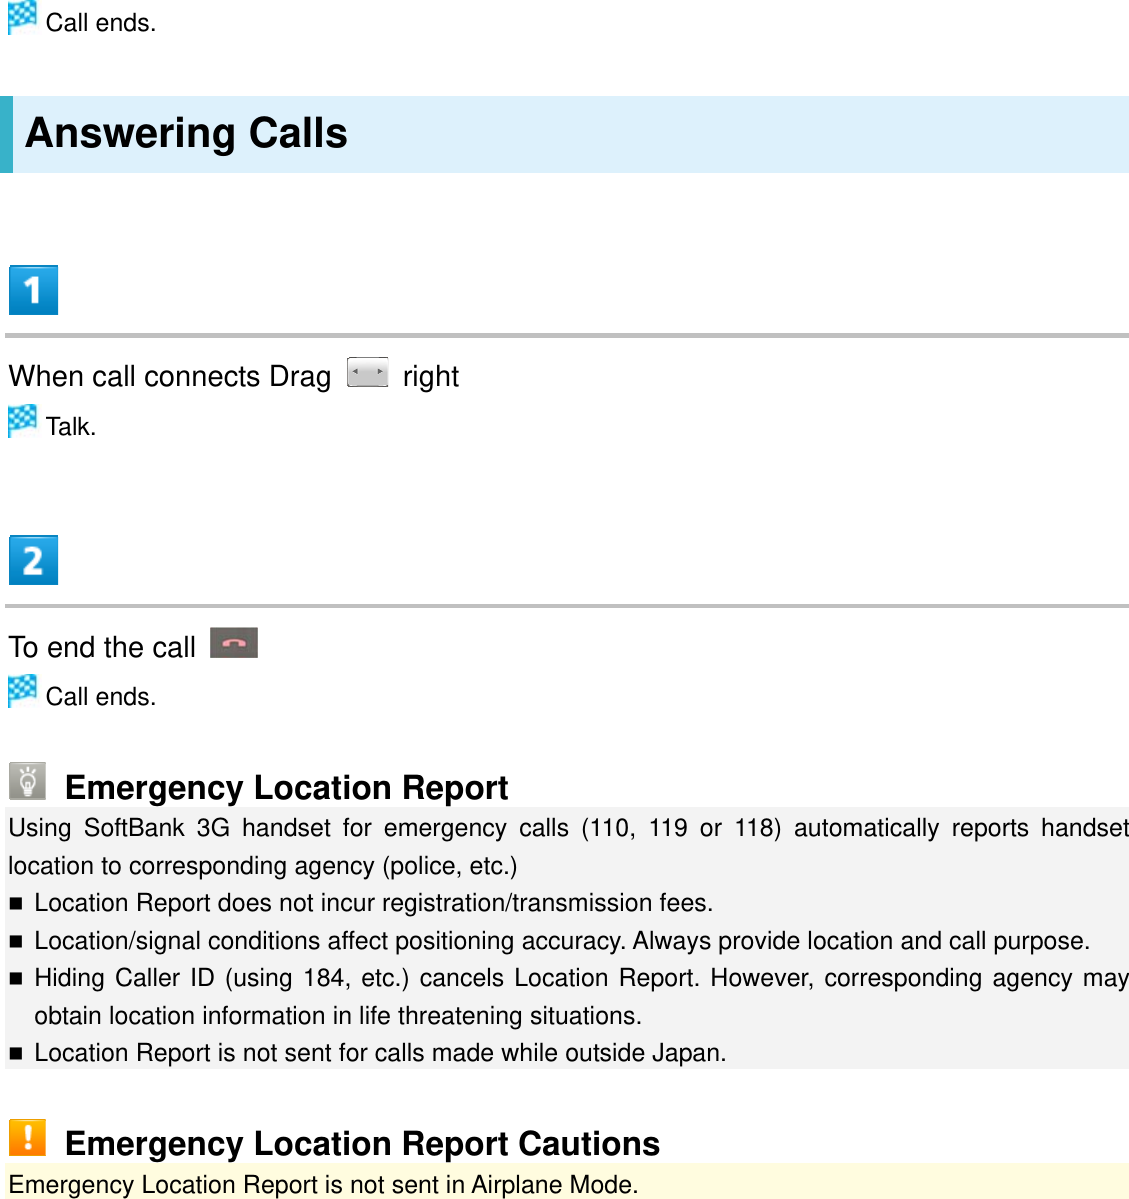  Call ends. Answering Calls  When call connects Drag   right  Talk.  To end the call    Call ends.  Emergency Location Report Using SoftBank 3G handset for emergency calls (110, 119 or 118) automatically reports handset location to corresponding agency (police, etc.)  Location Report does not incur registration/transmission fees.  Location/signal conditions affect positioning accuracy. Always provide location and call purpose.  Hiding Caller ID (using 184, etc.) cancels Location Report. However, corresponding agency may obtain location information in life threatening situations.   Location Report is not sent for calls made while outside Japan.  Emergency Location Report Cautions Emergency Location Report is not sent in Airplane Mode.   